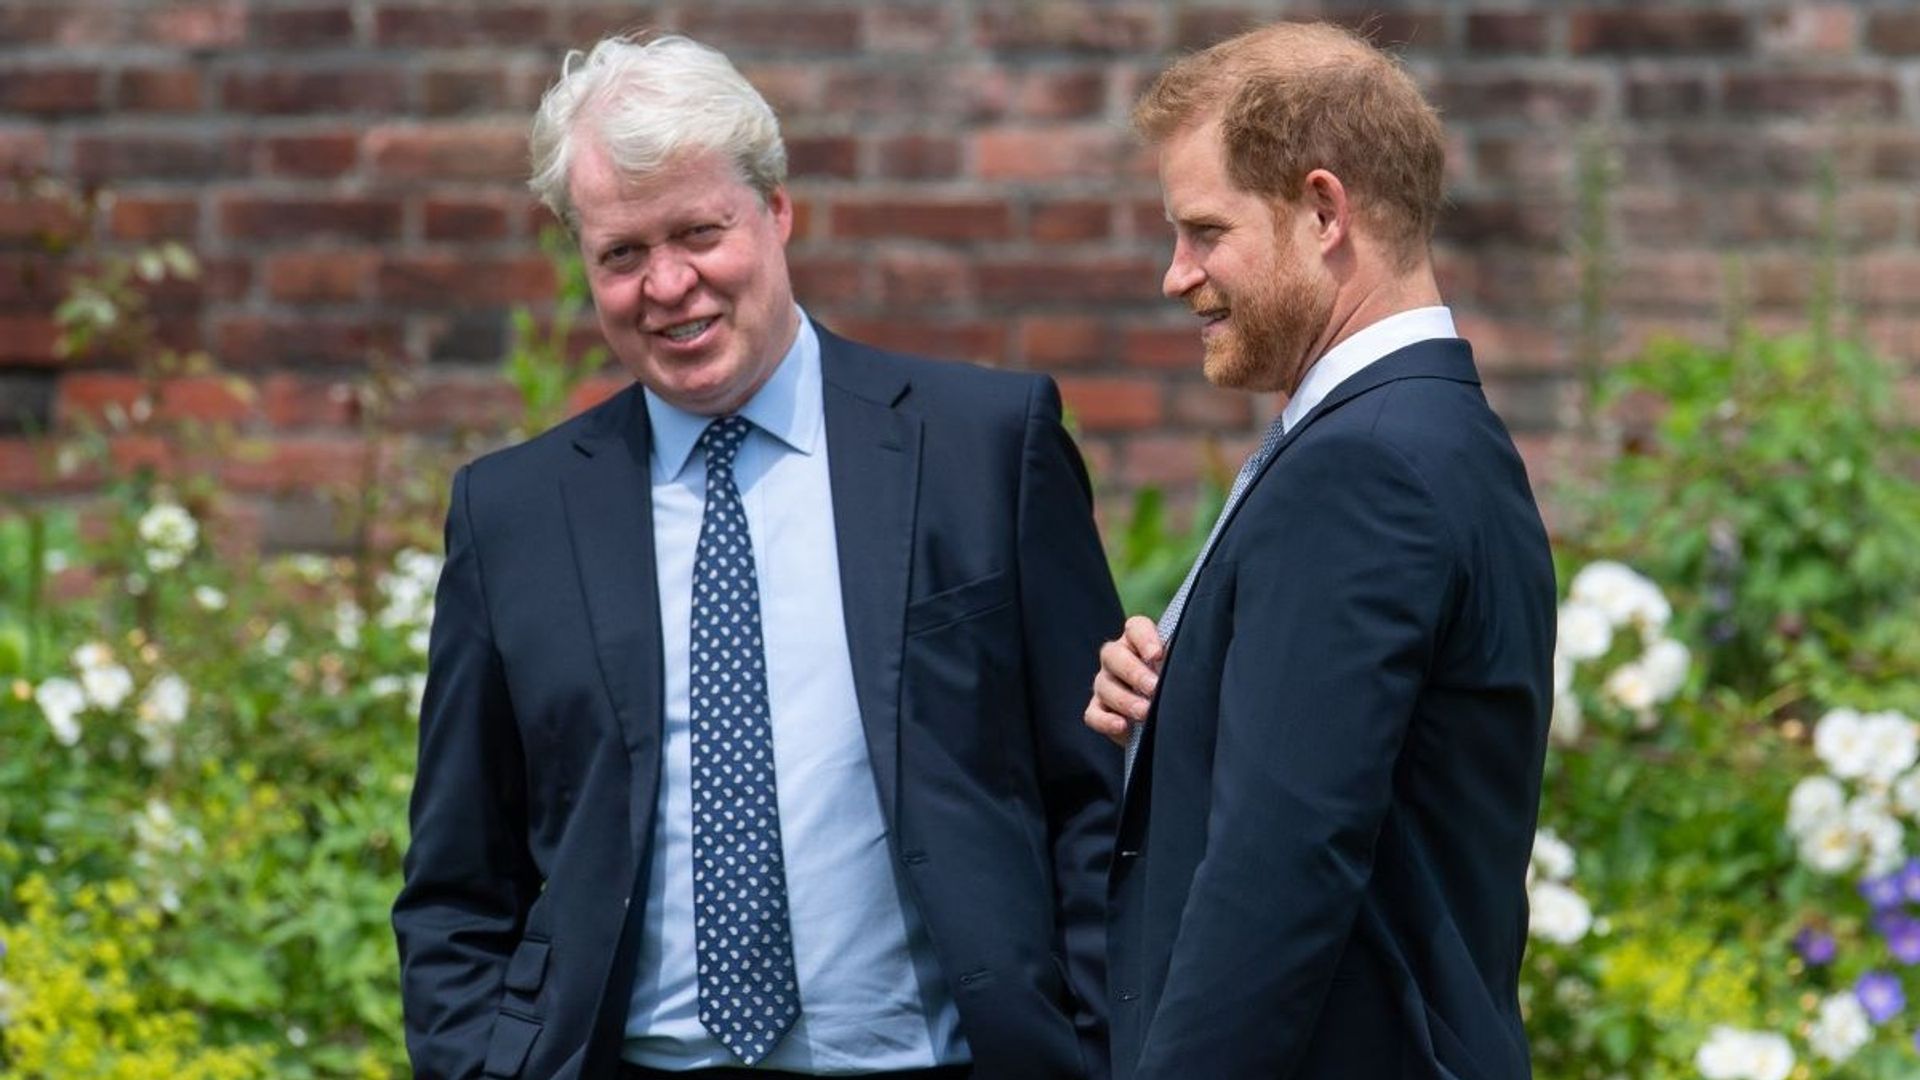 Charles Spencer shows support for nephew Prince Harry amid court case